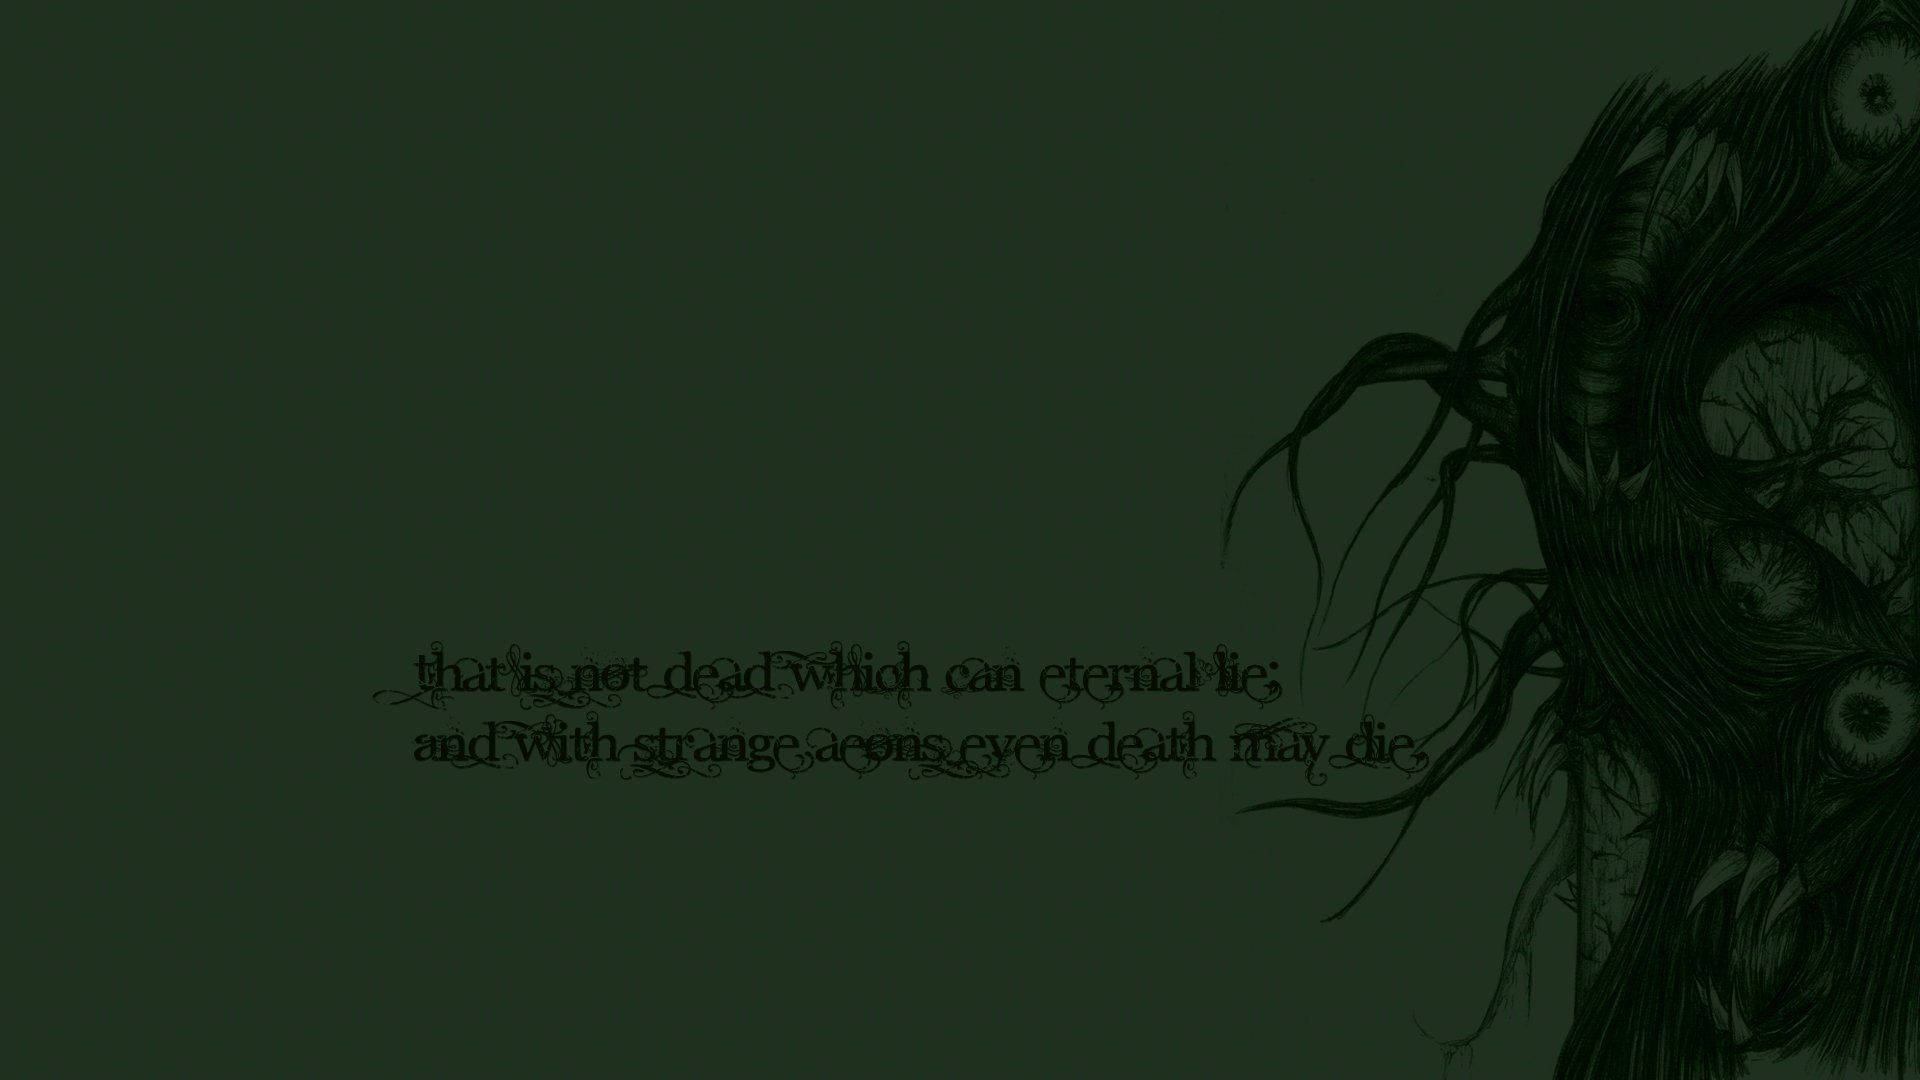 H.p. Lovecraft Quote Background